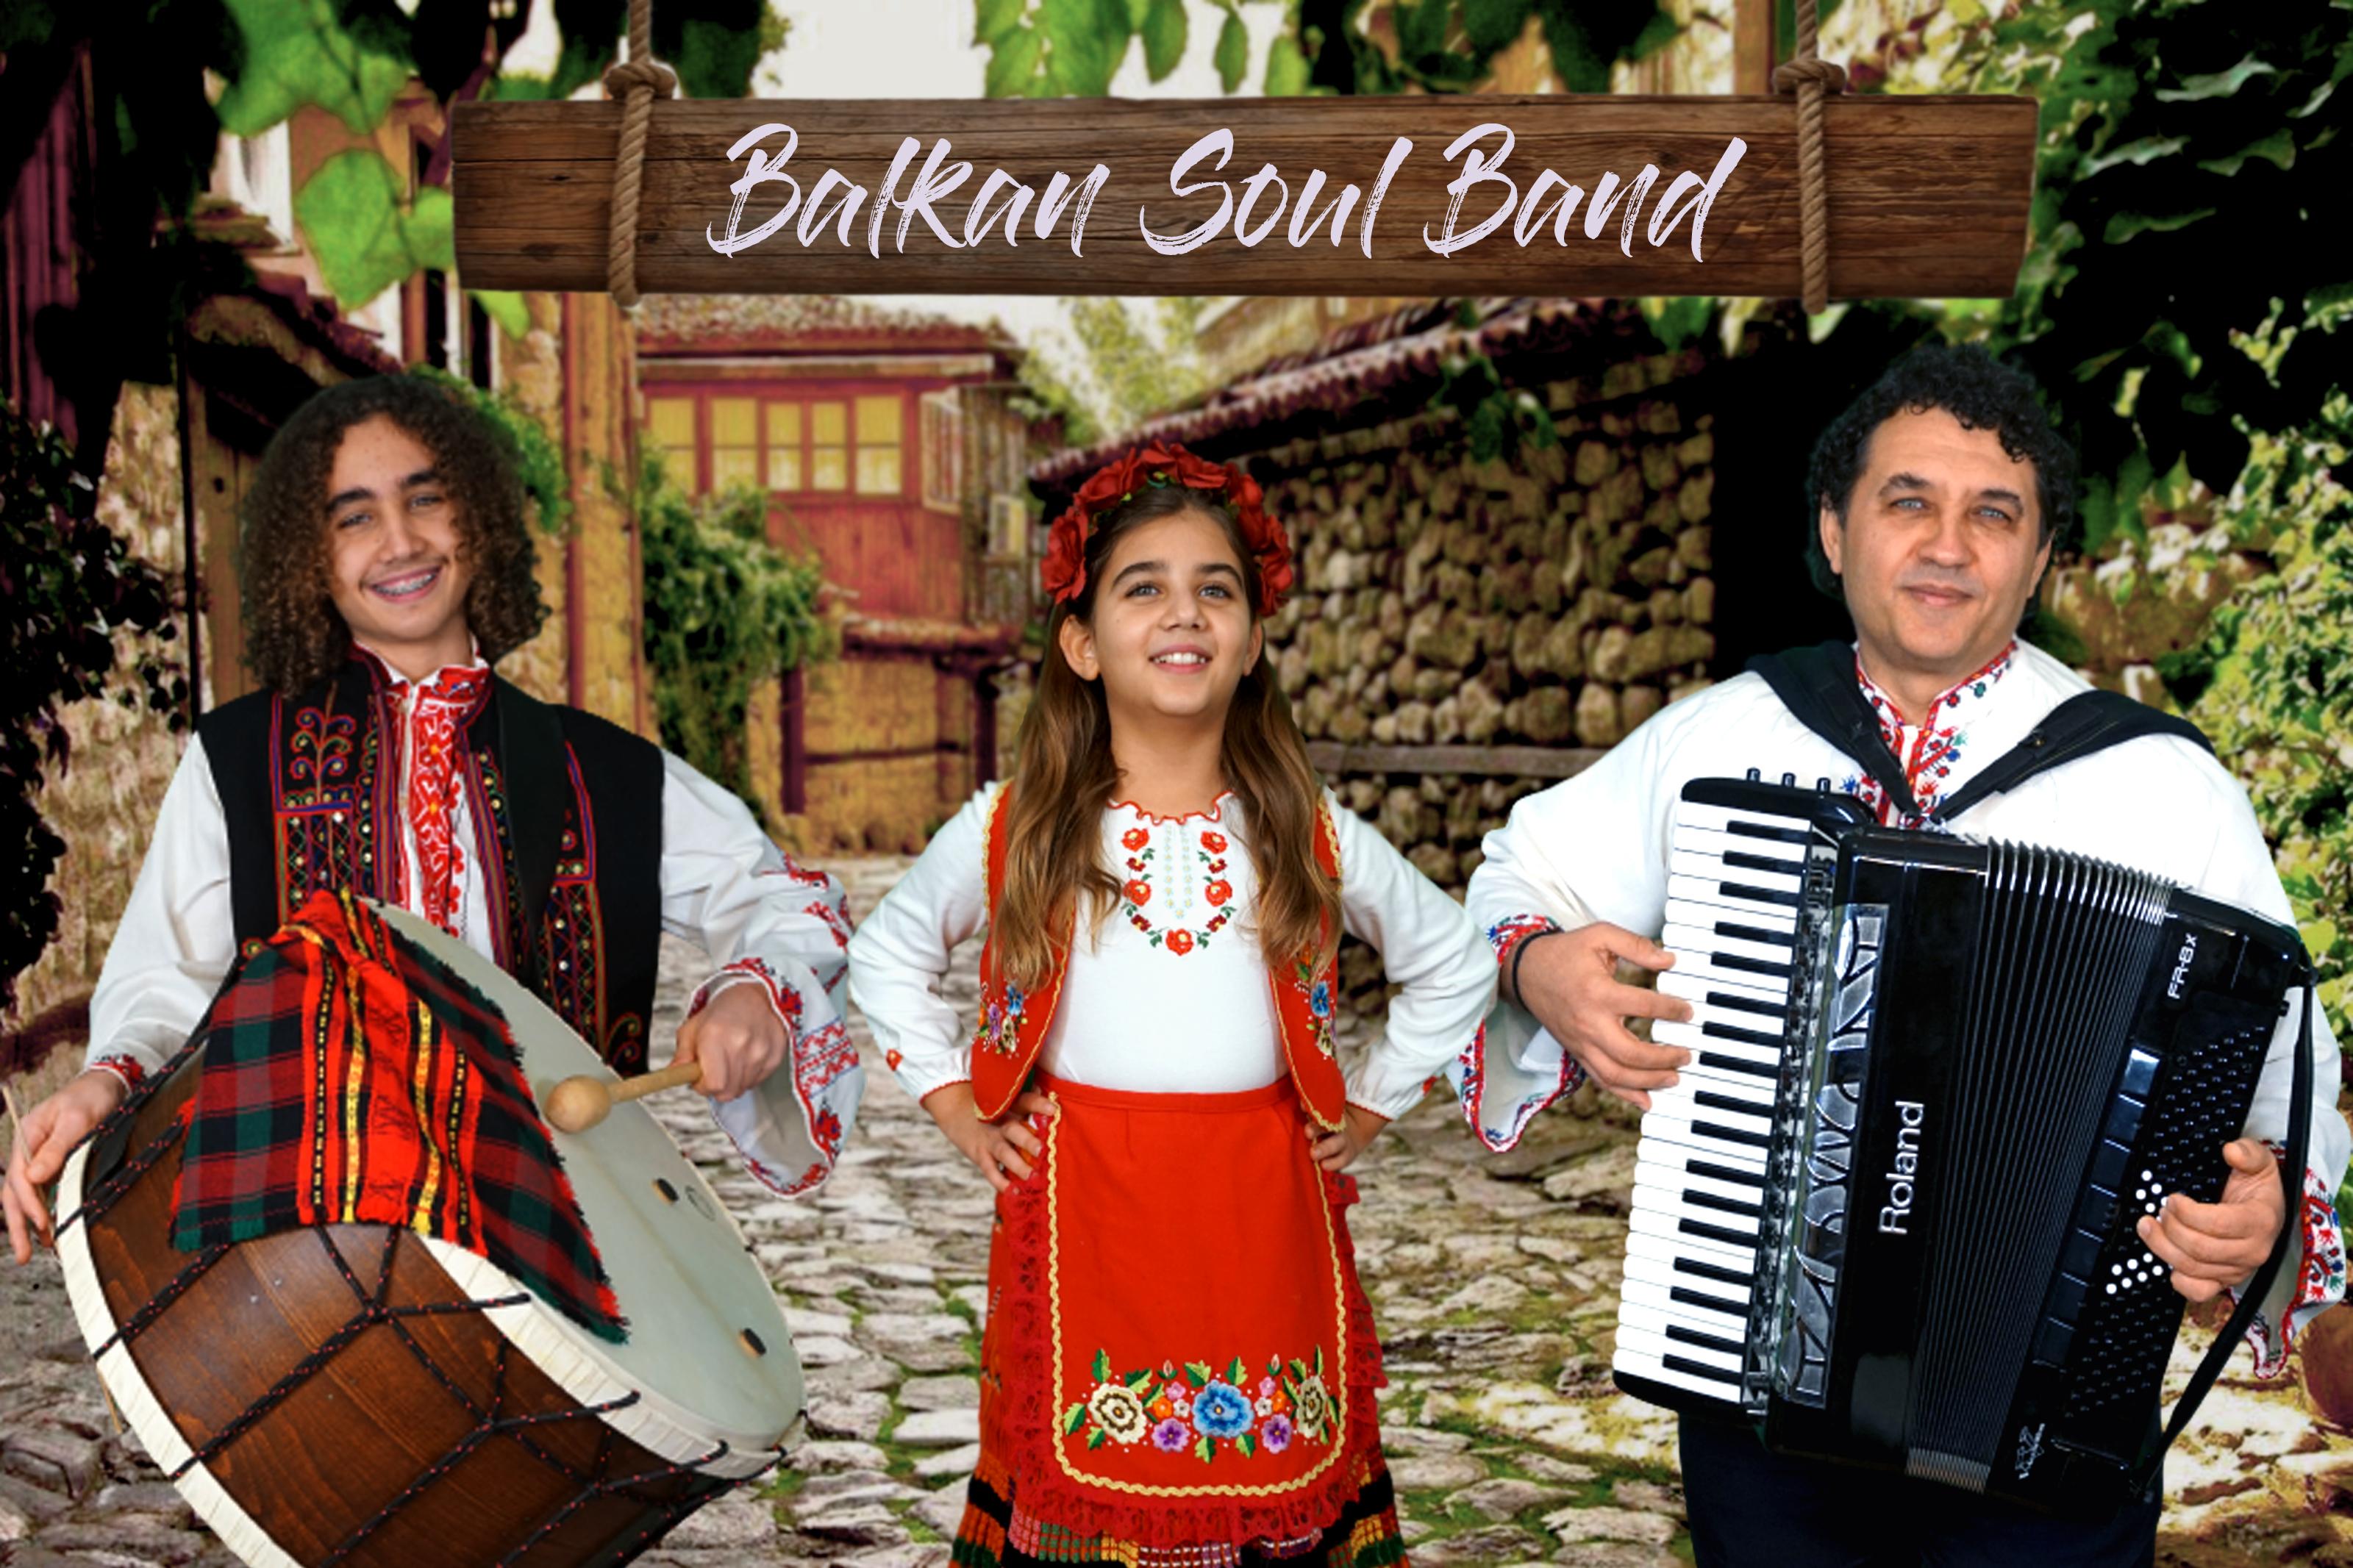 Father-daughter duo keeps Bulgarian folk music alive in Maryland